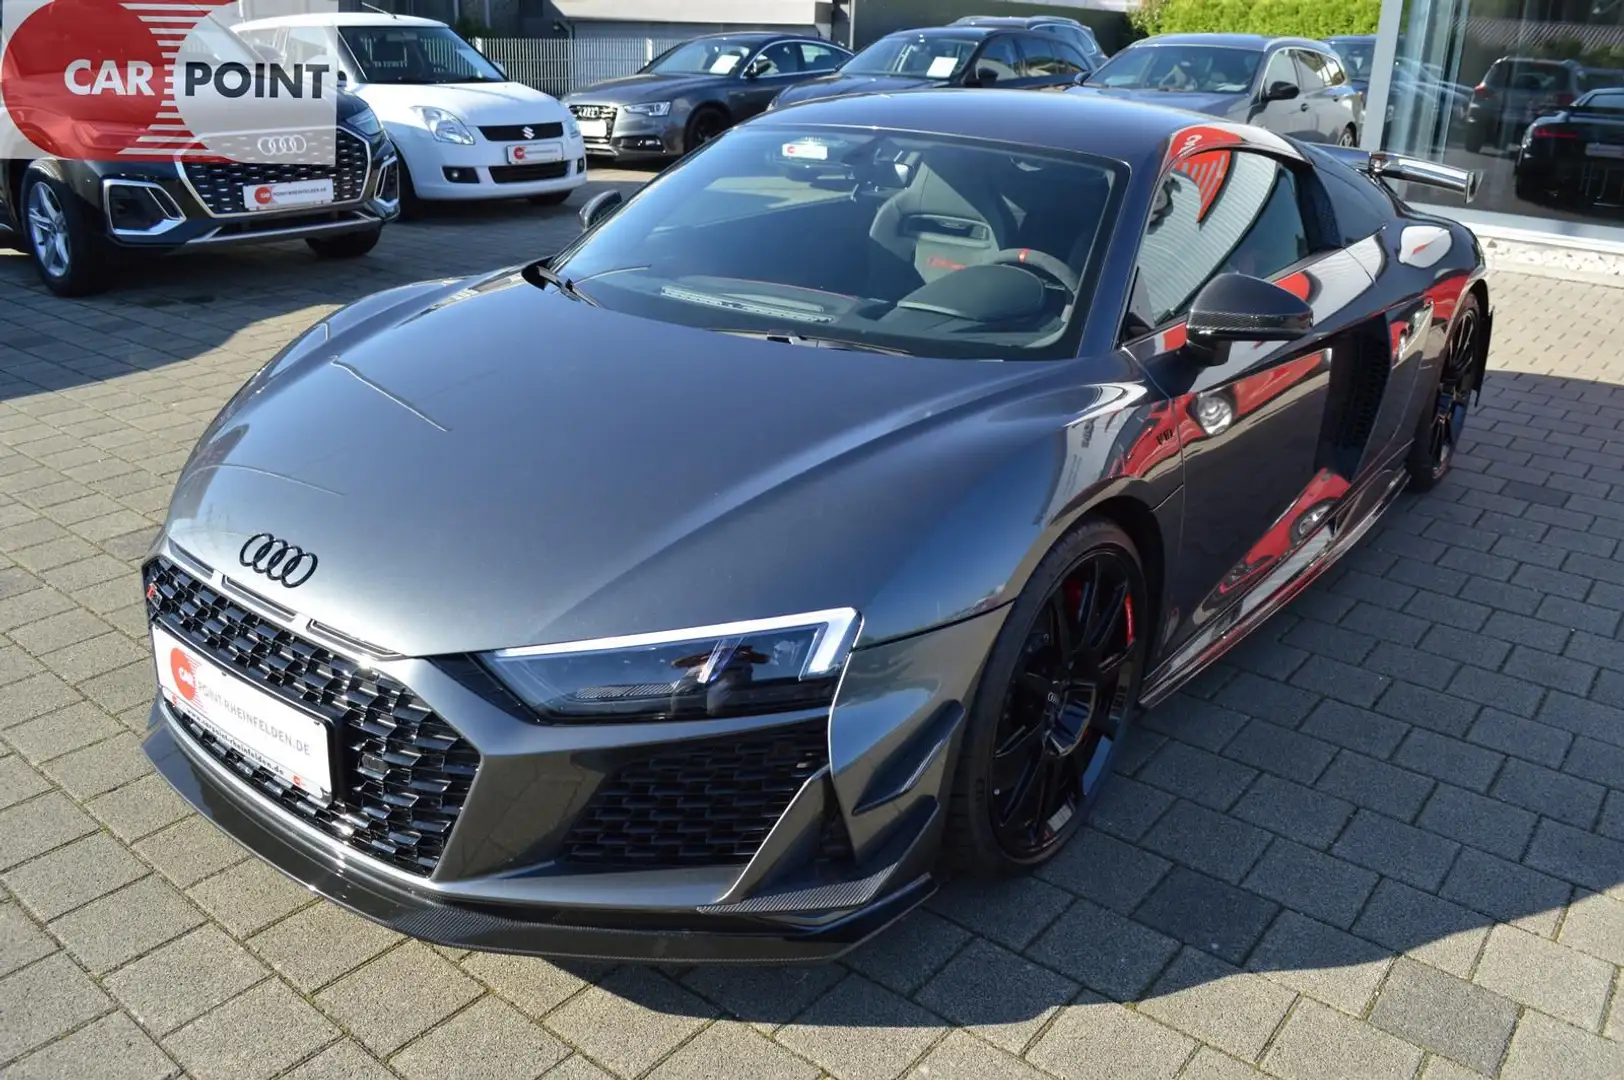 Audi R8 GT V10 RWD - Limited Edition - 1 of 333 siva - 2